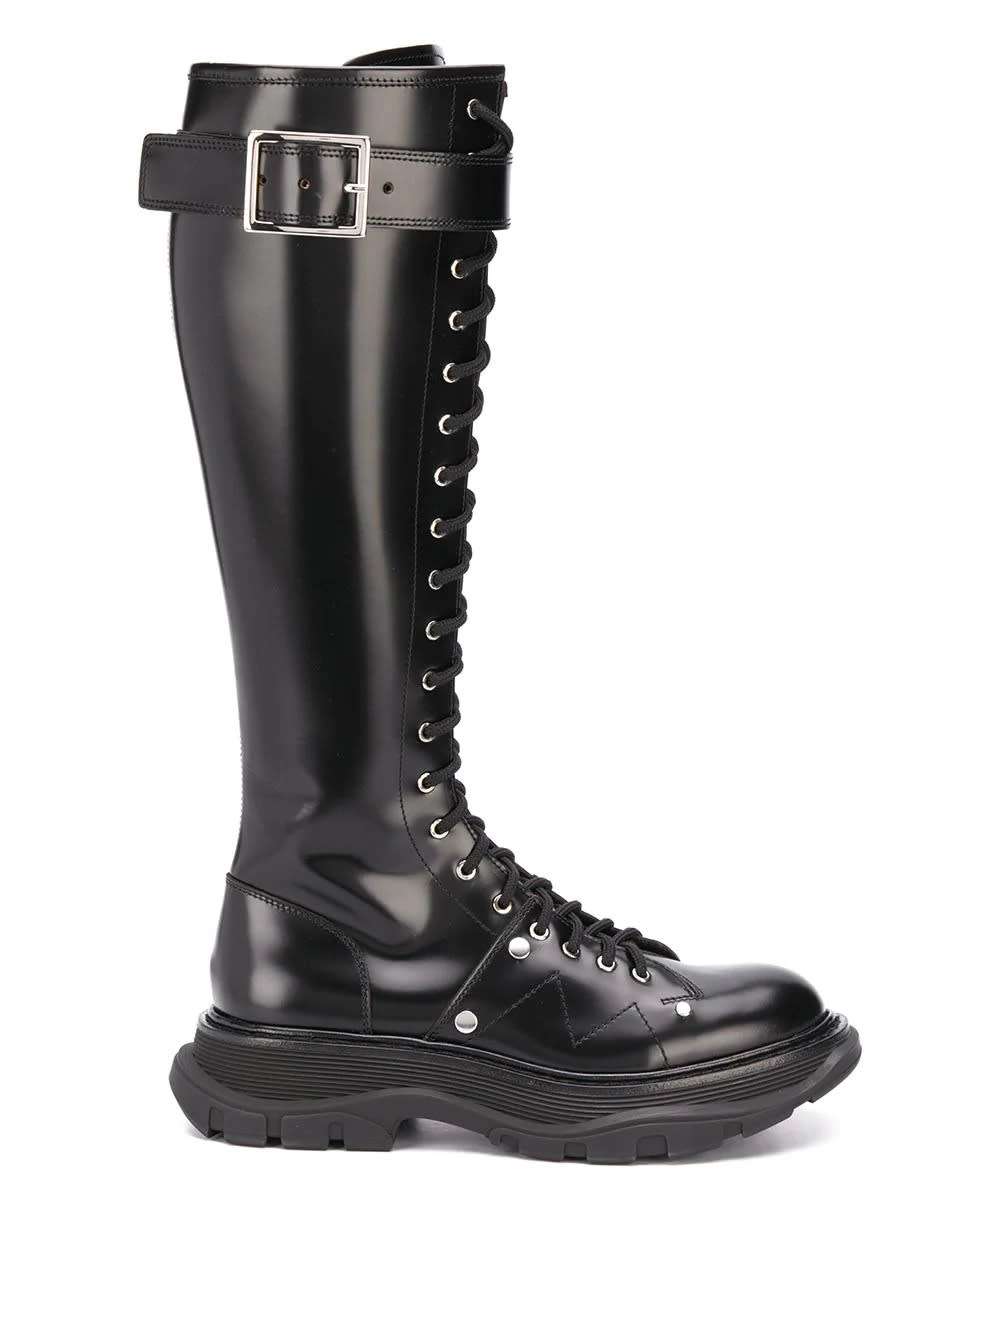 Buy Alexander McQueen Woman Black Boot With Laces And Tread Sole online, shop Alexander McQueen shoes with free shipping